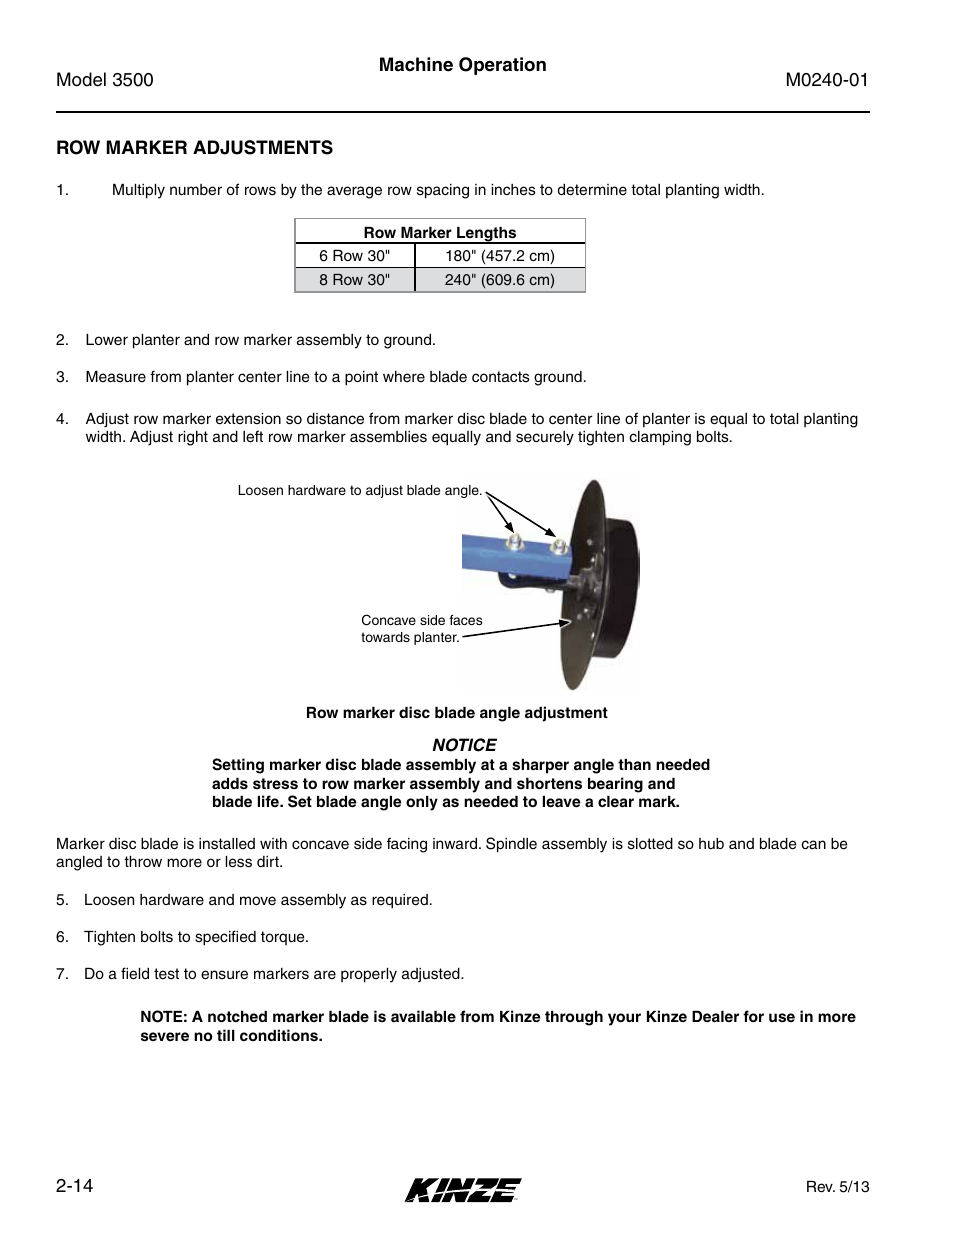 Row marker adjustments, Row marker adjustments -14 | Kinze 3500 Lift and Rotate Planter Rev. 7/14 User Manual | Page 26 / 140